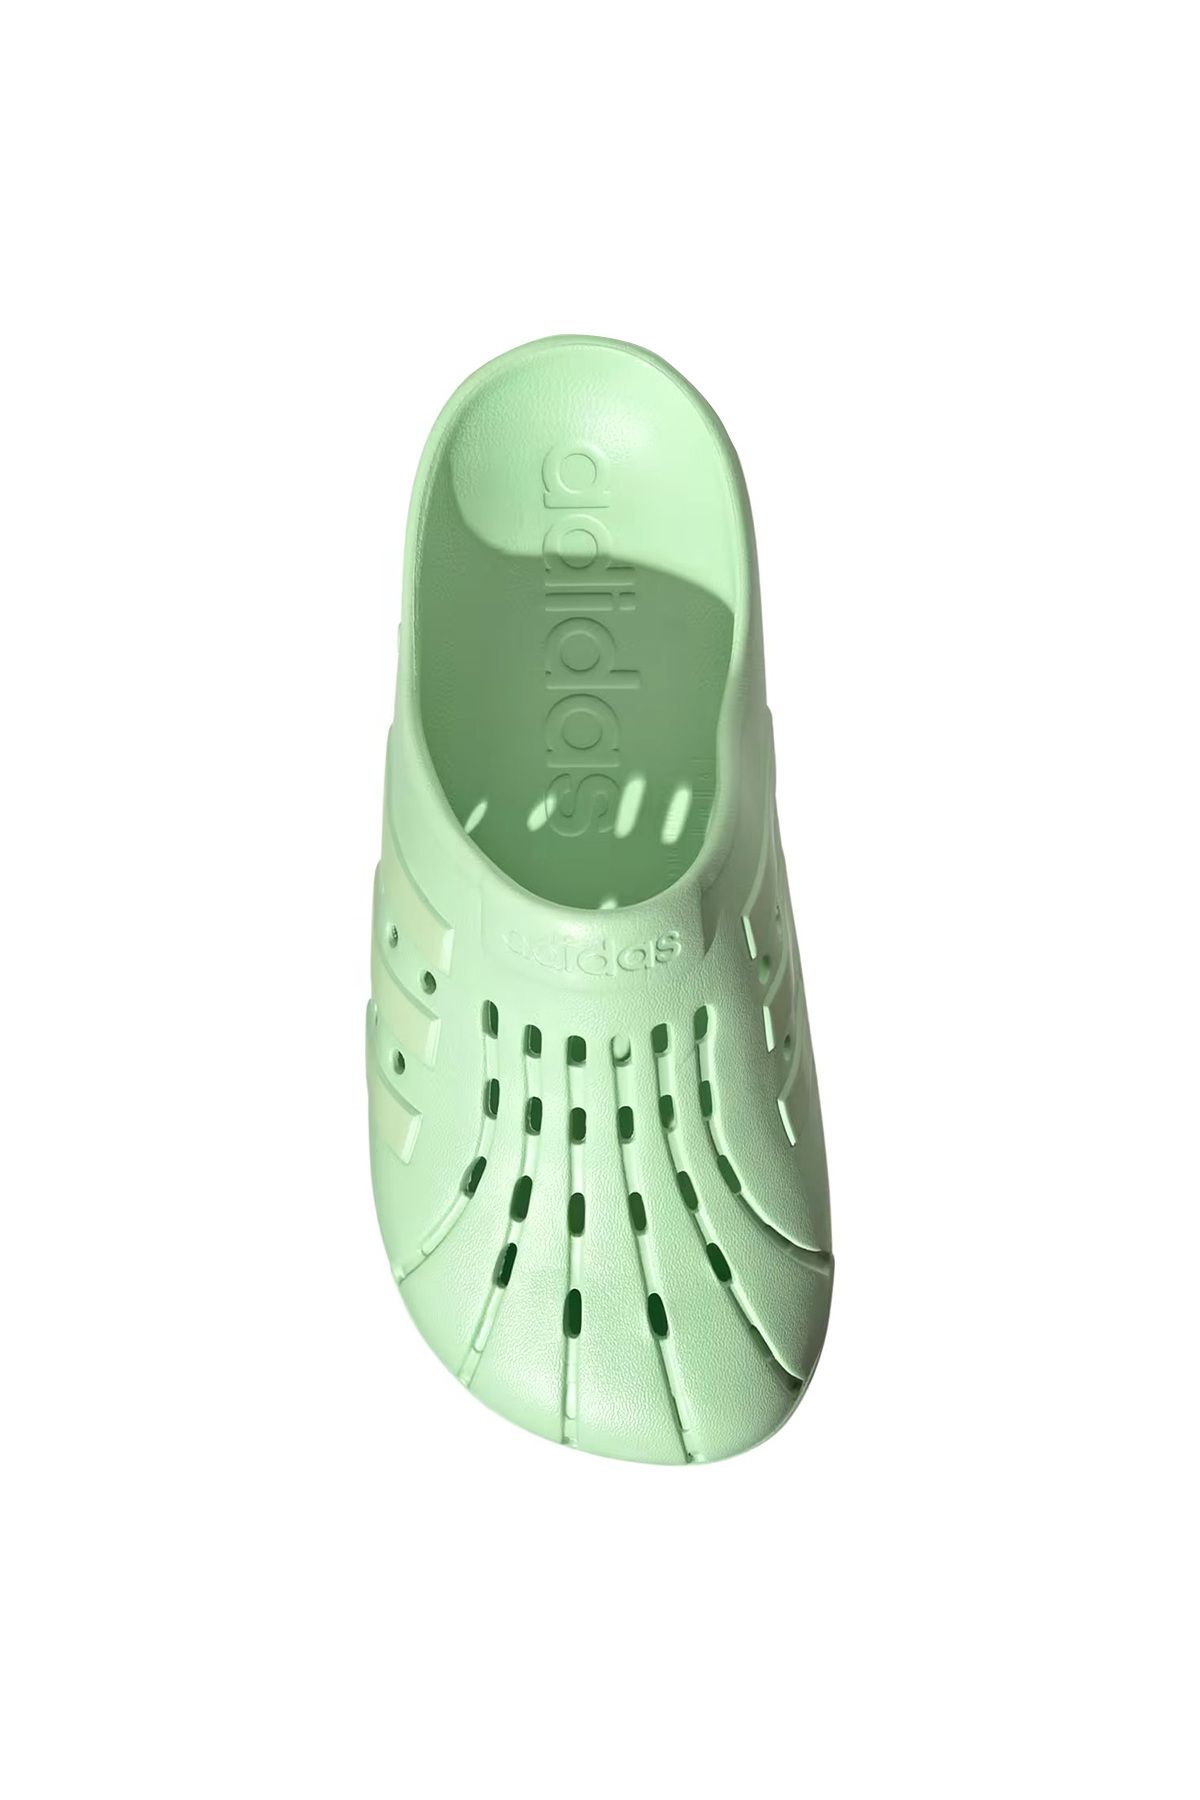 adidas Adilette Clog Unisex Green Daily Dippers IF0793